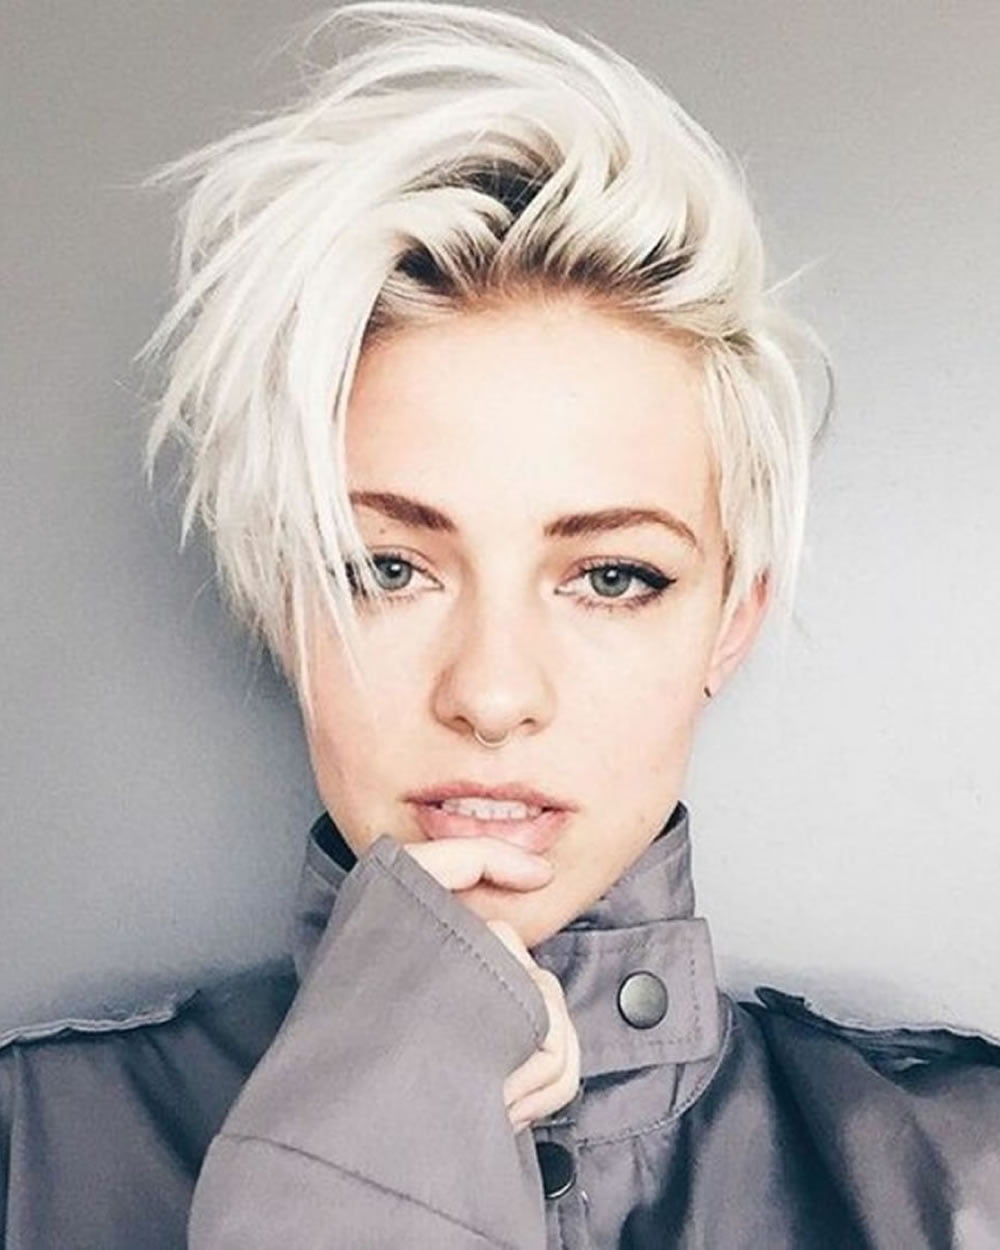 Ultra Short Hairstyle Ideas & Very Short Pixie Hair Cut Images – HAIRSTYLES